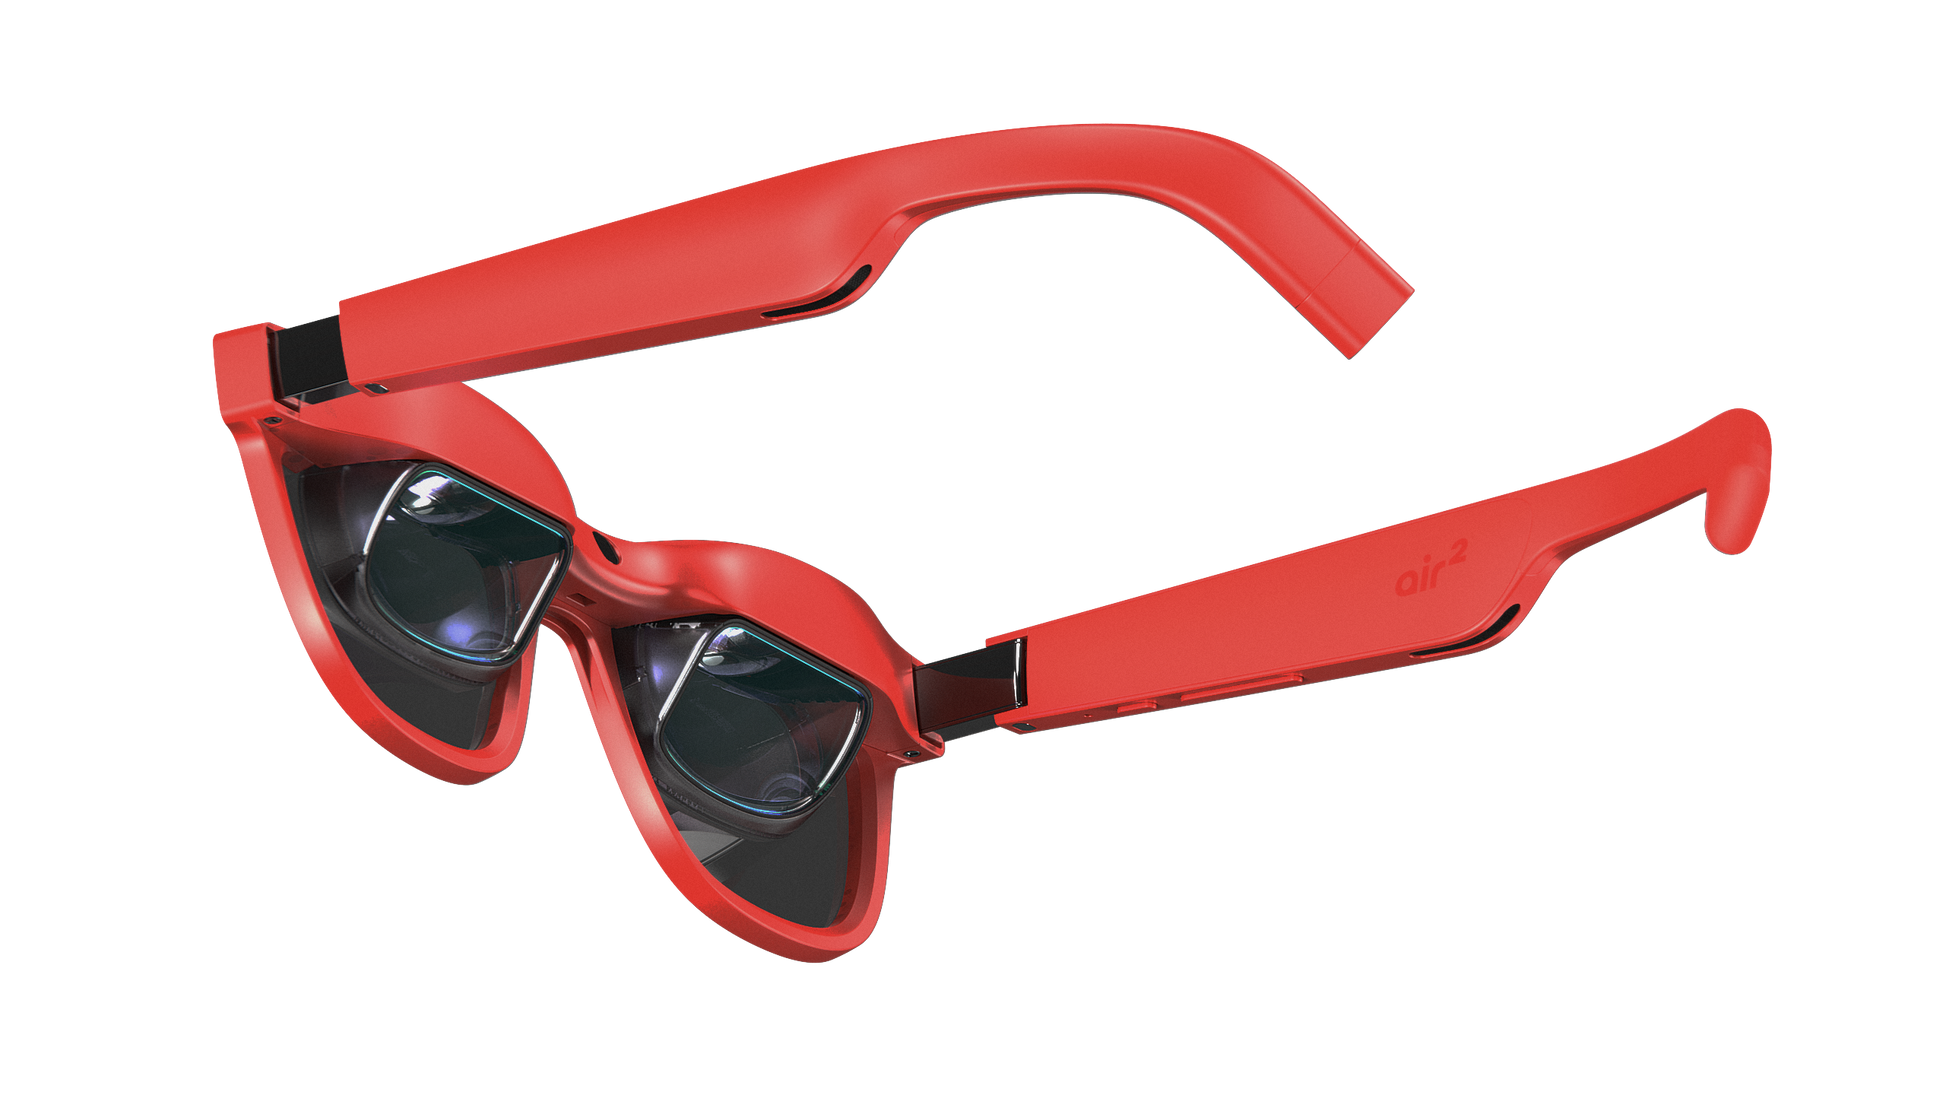 Xreal's $400 Air 2 augmented reality glasses are now available to pre-order